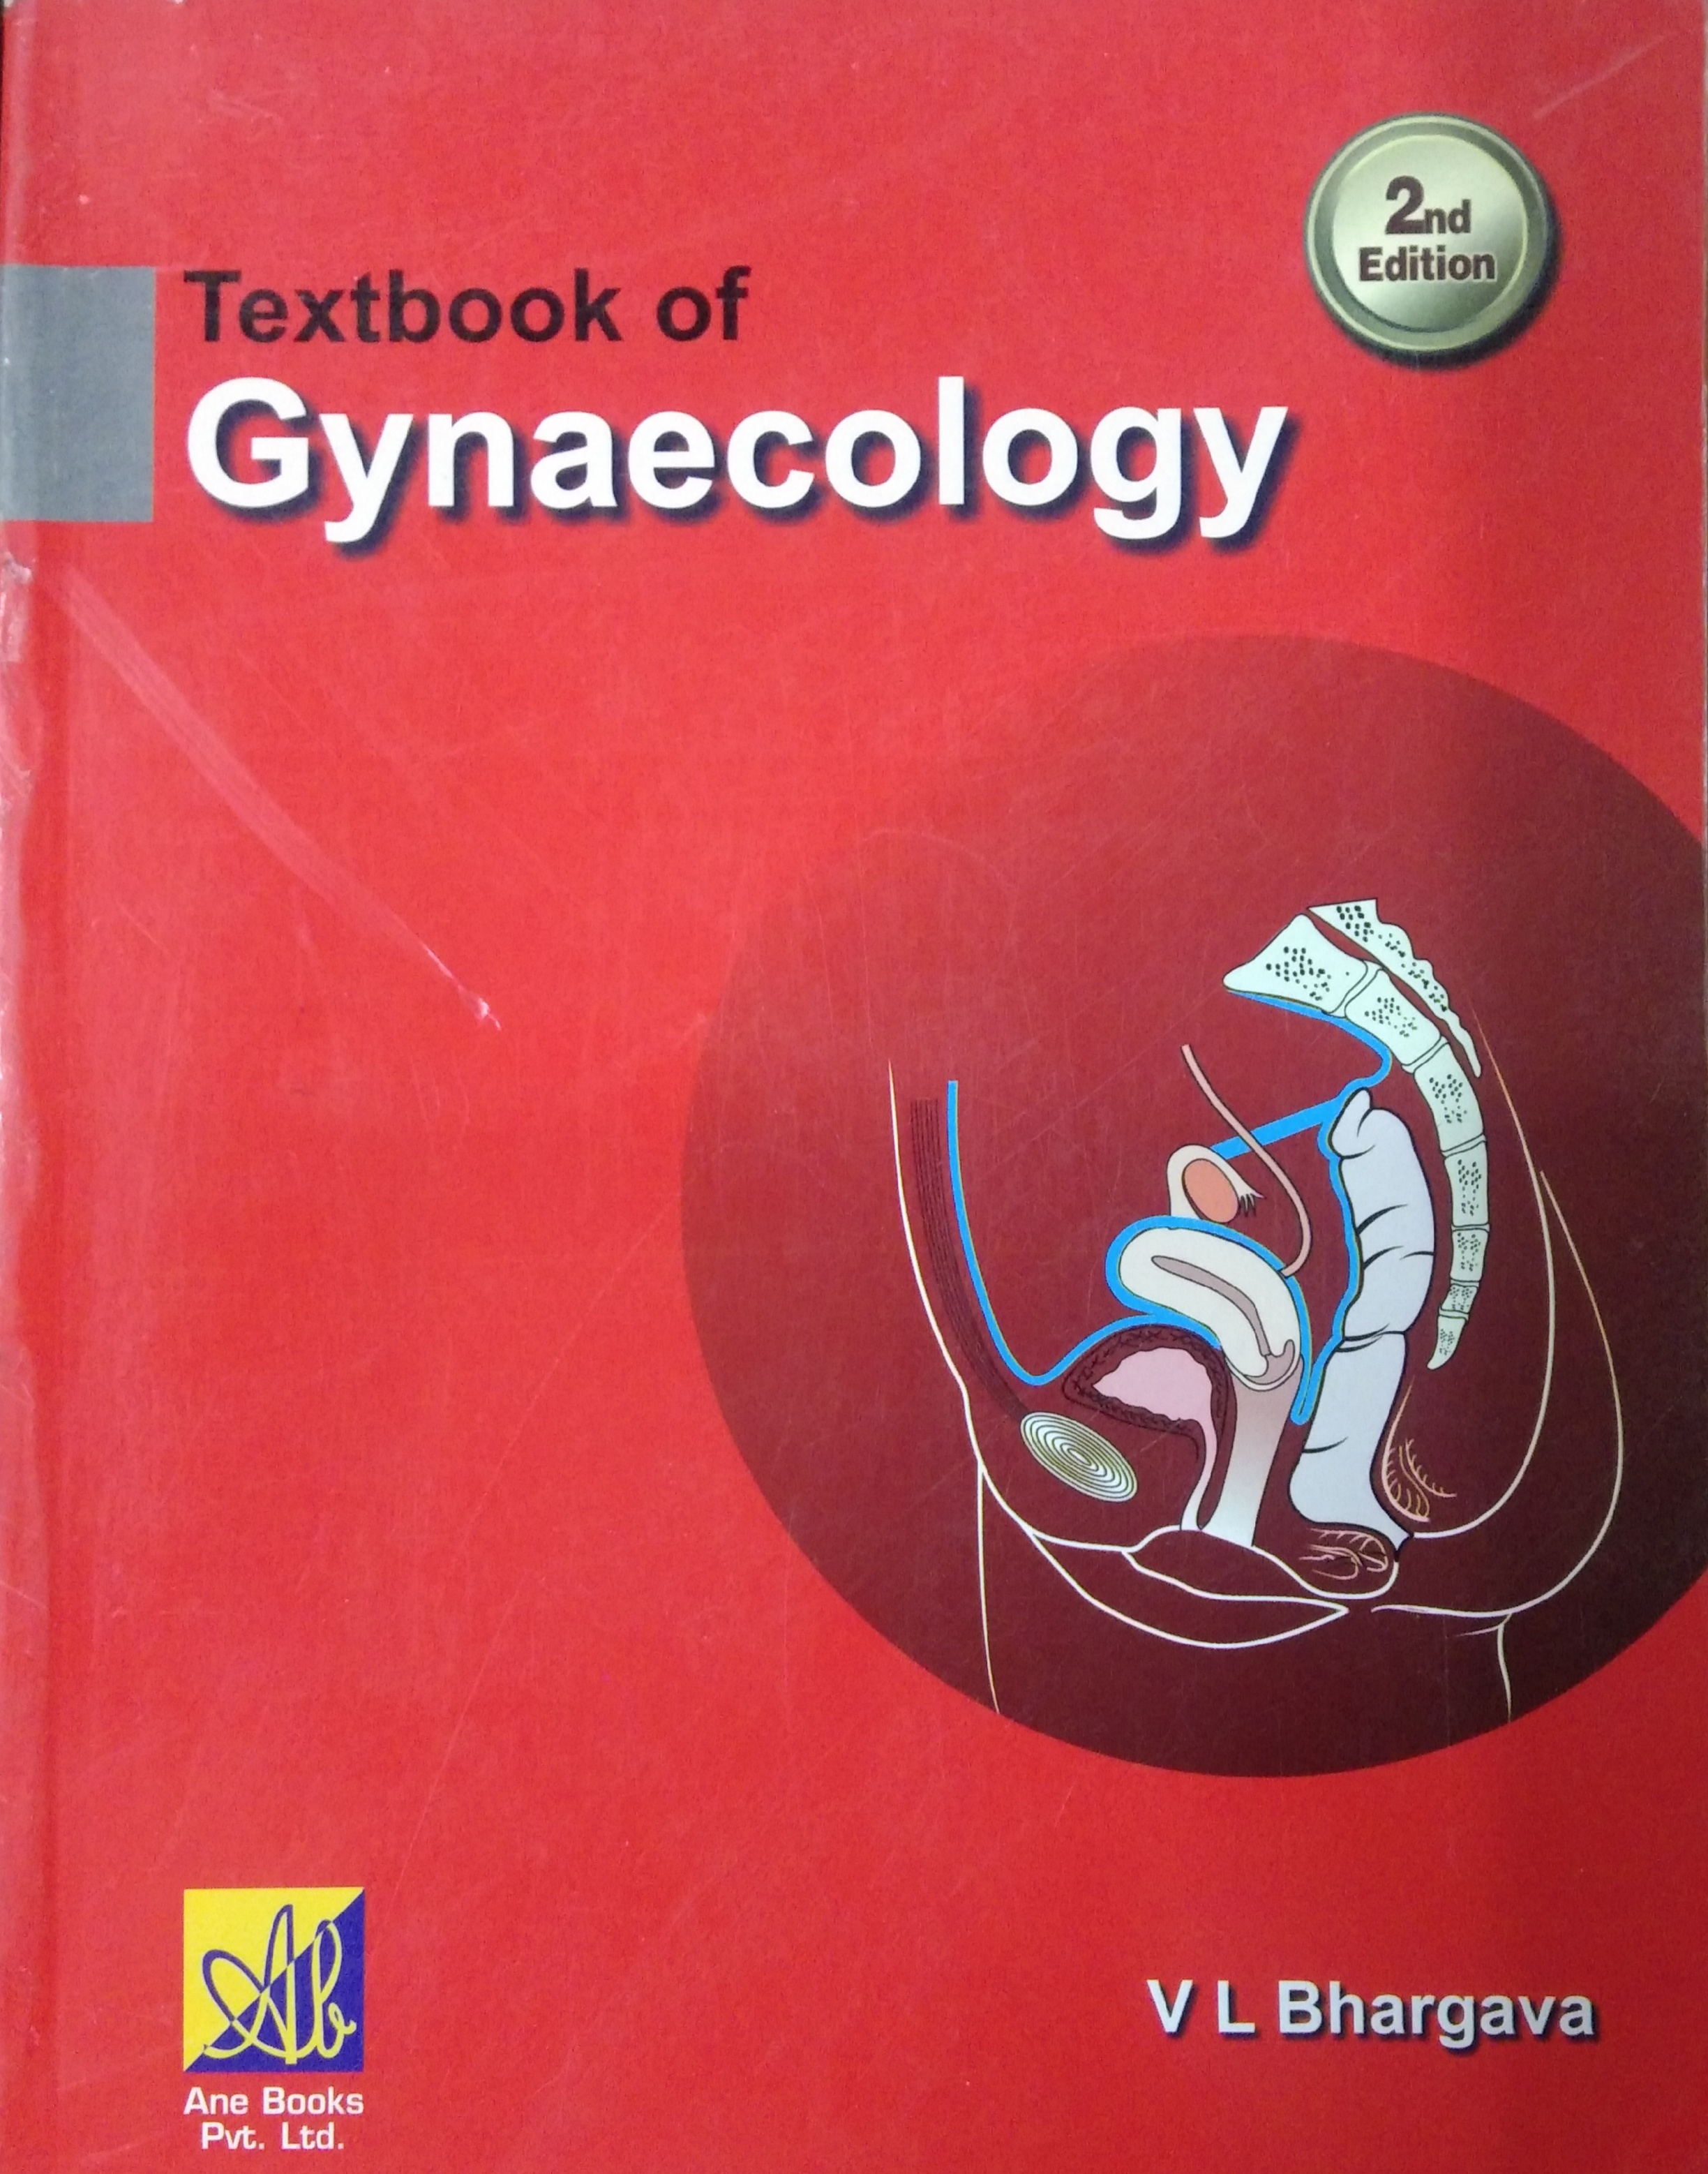 

surgical-sciences/obstetrics-and-gynecology/textbook-of-gynaecology-2ed-9788180522864